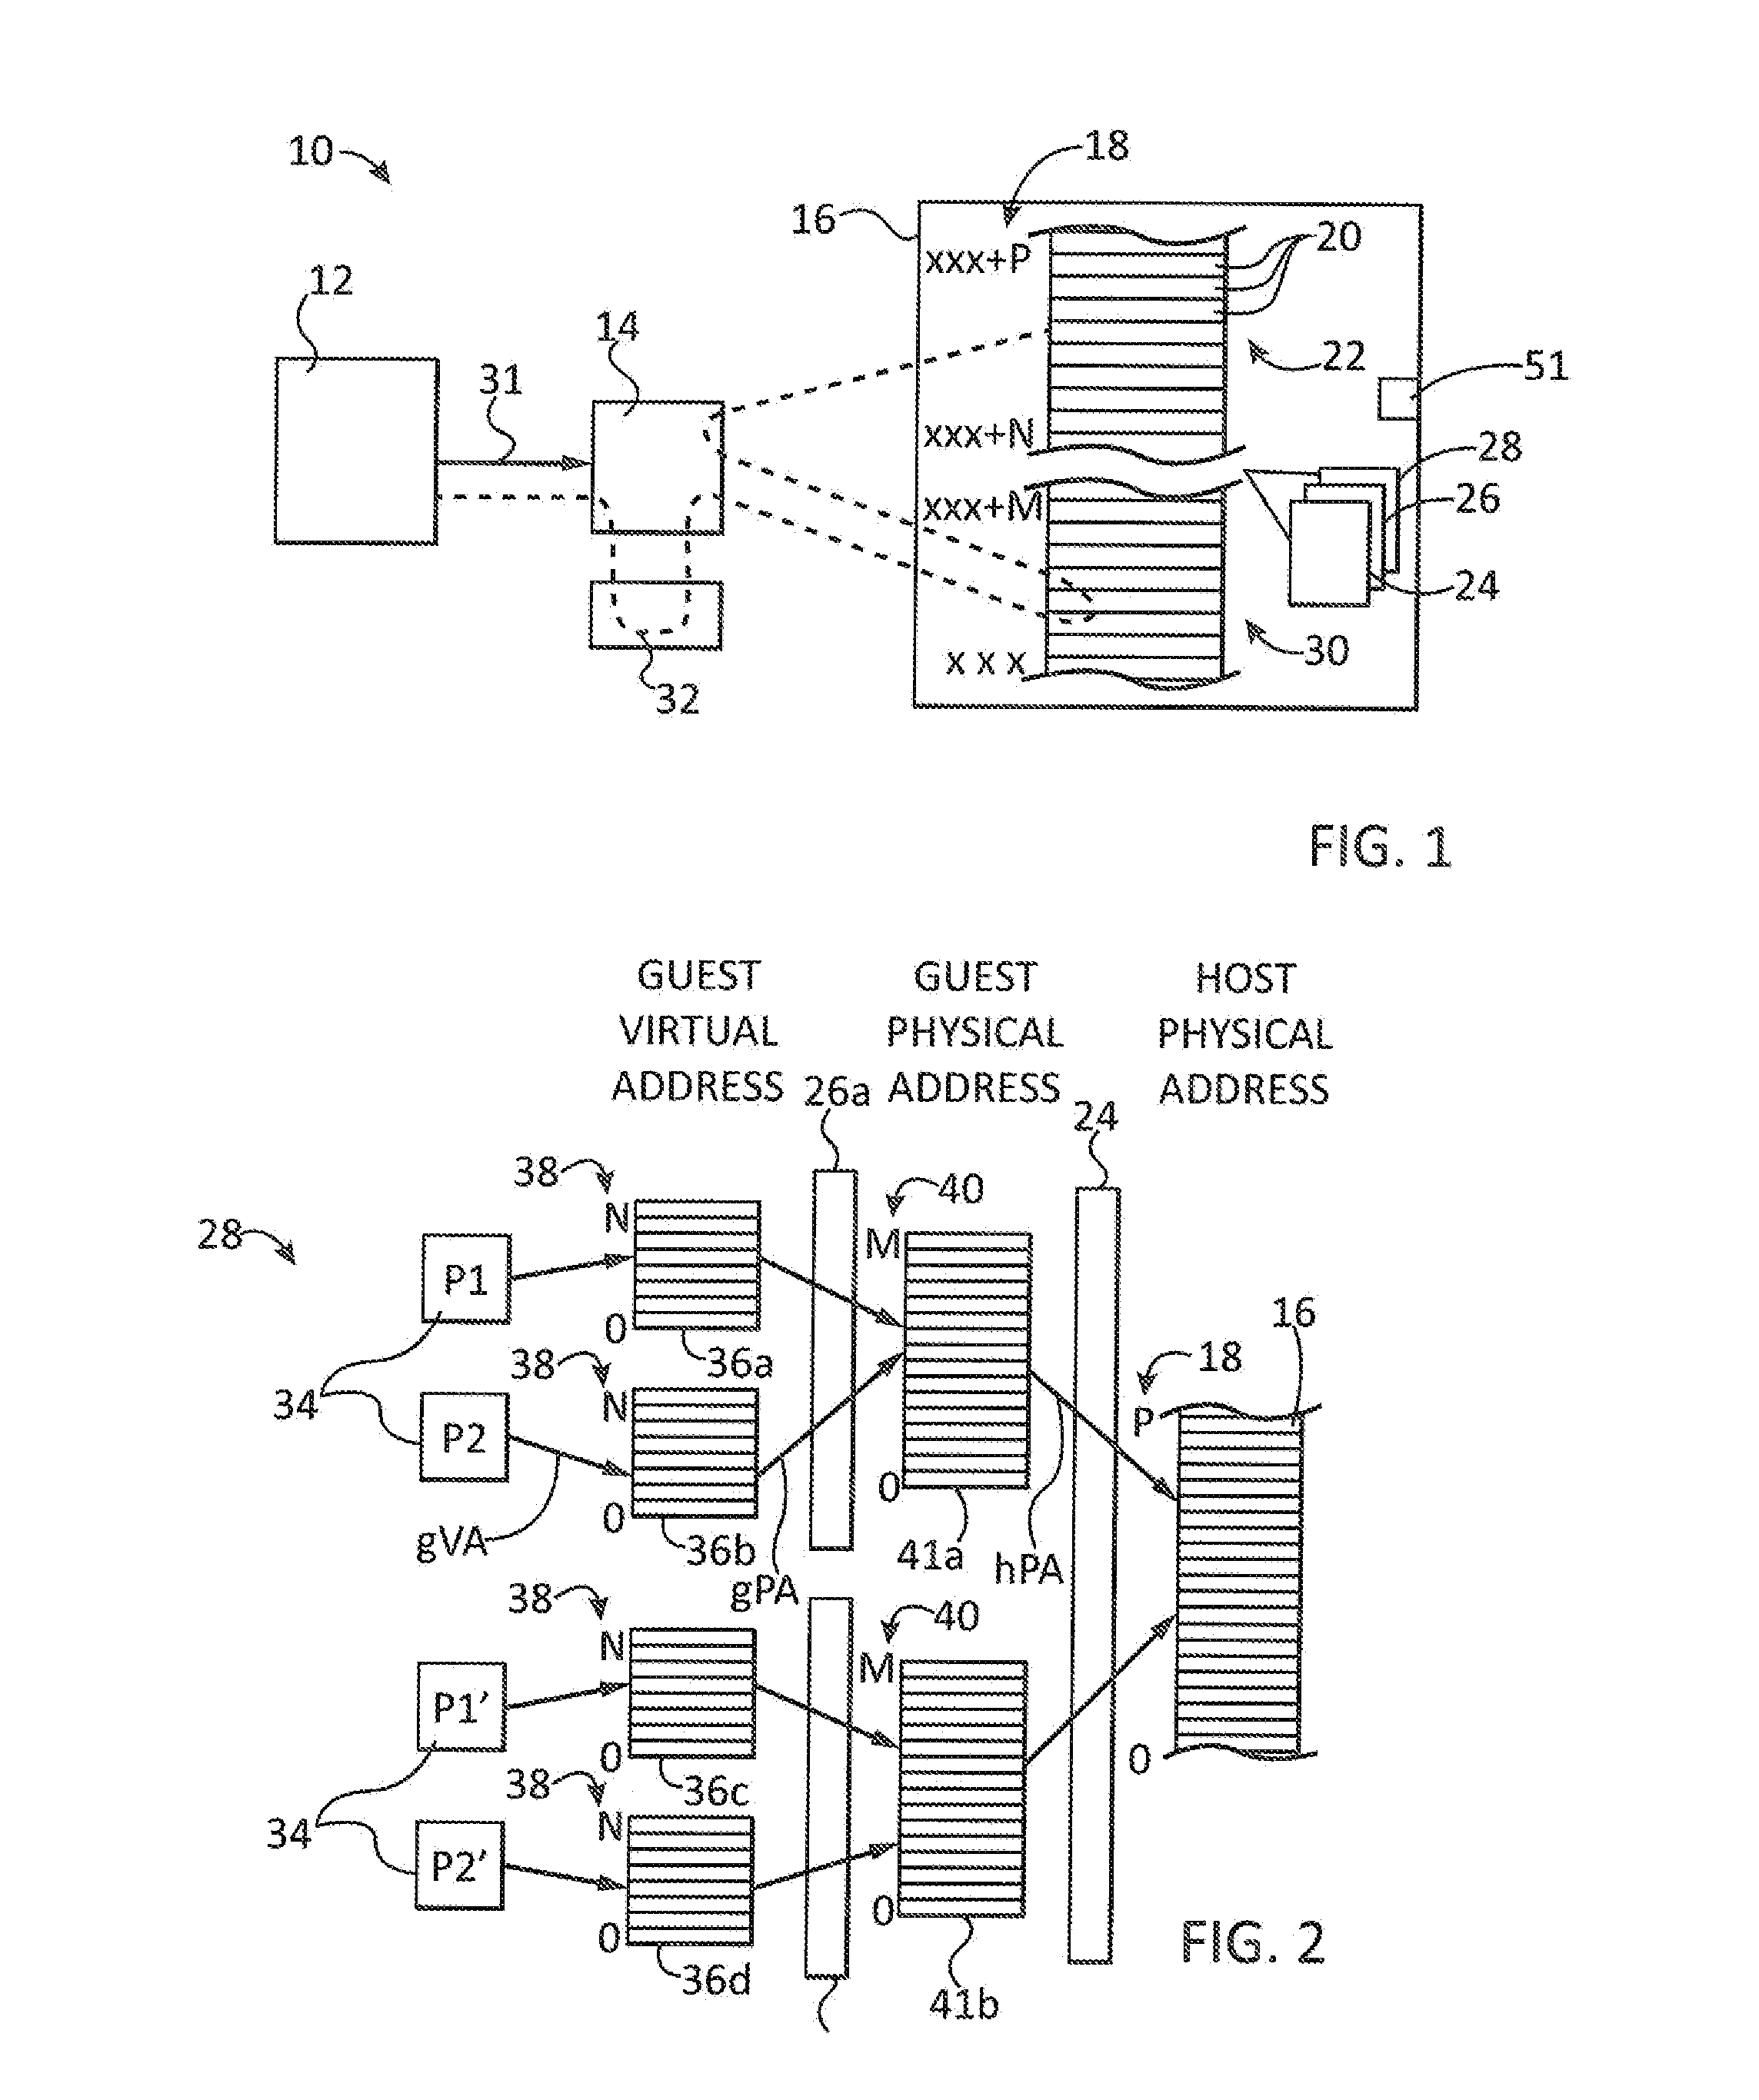 Efficient Memory Management System for Computers Supporting Virtual Machines